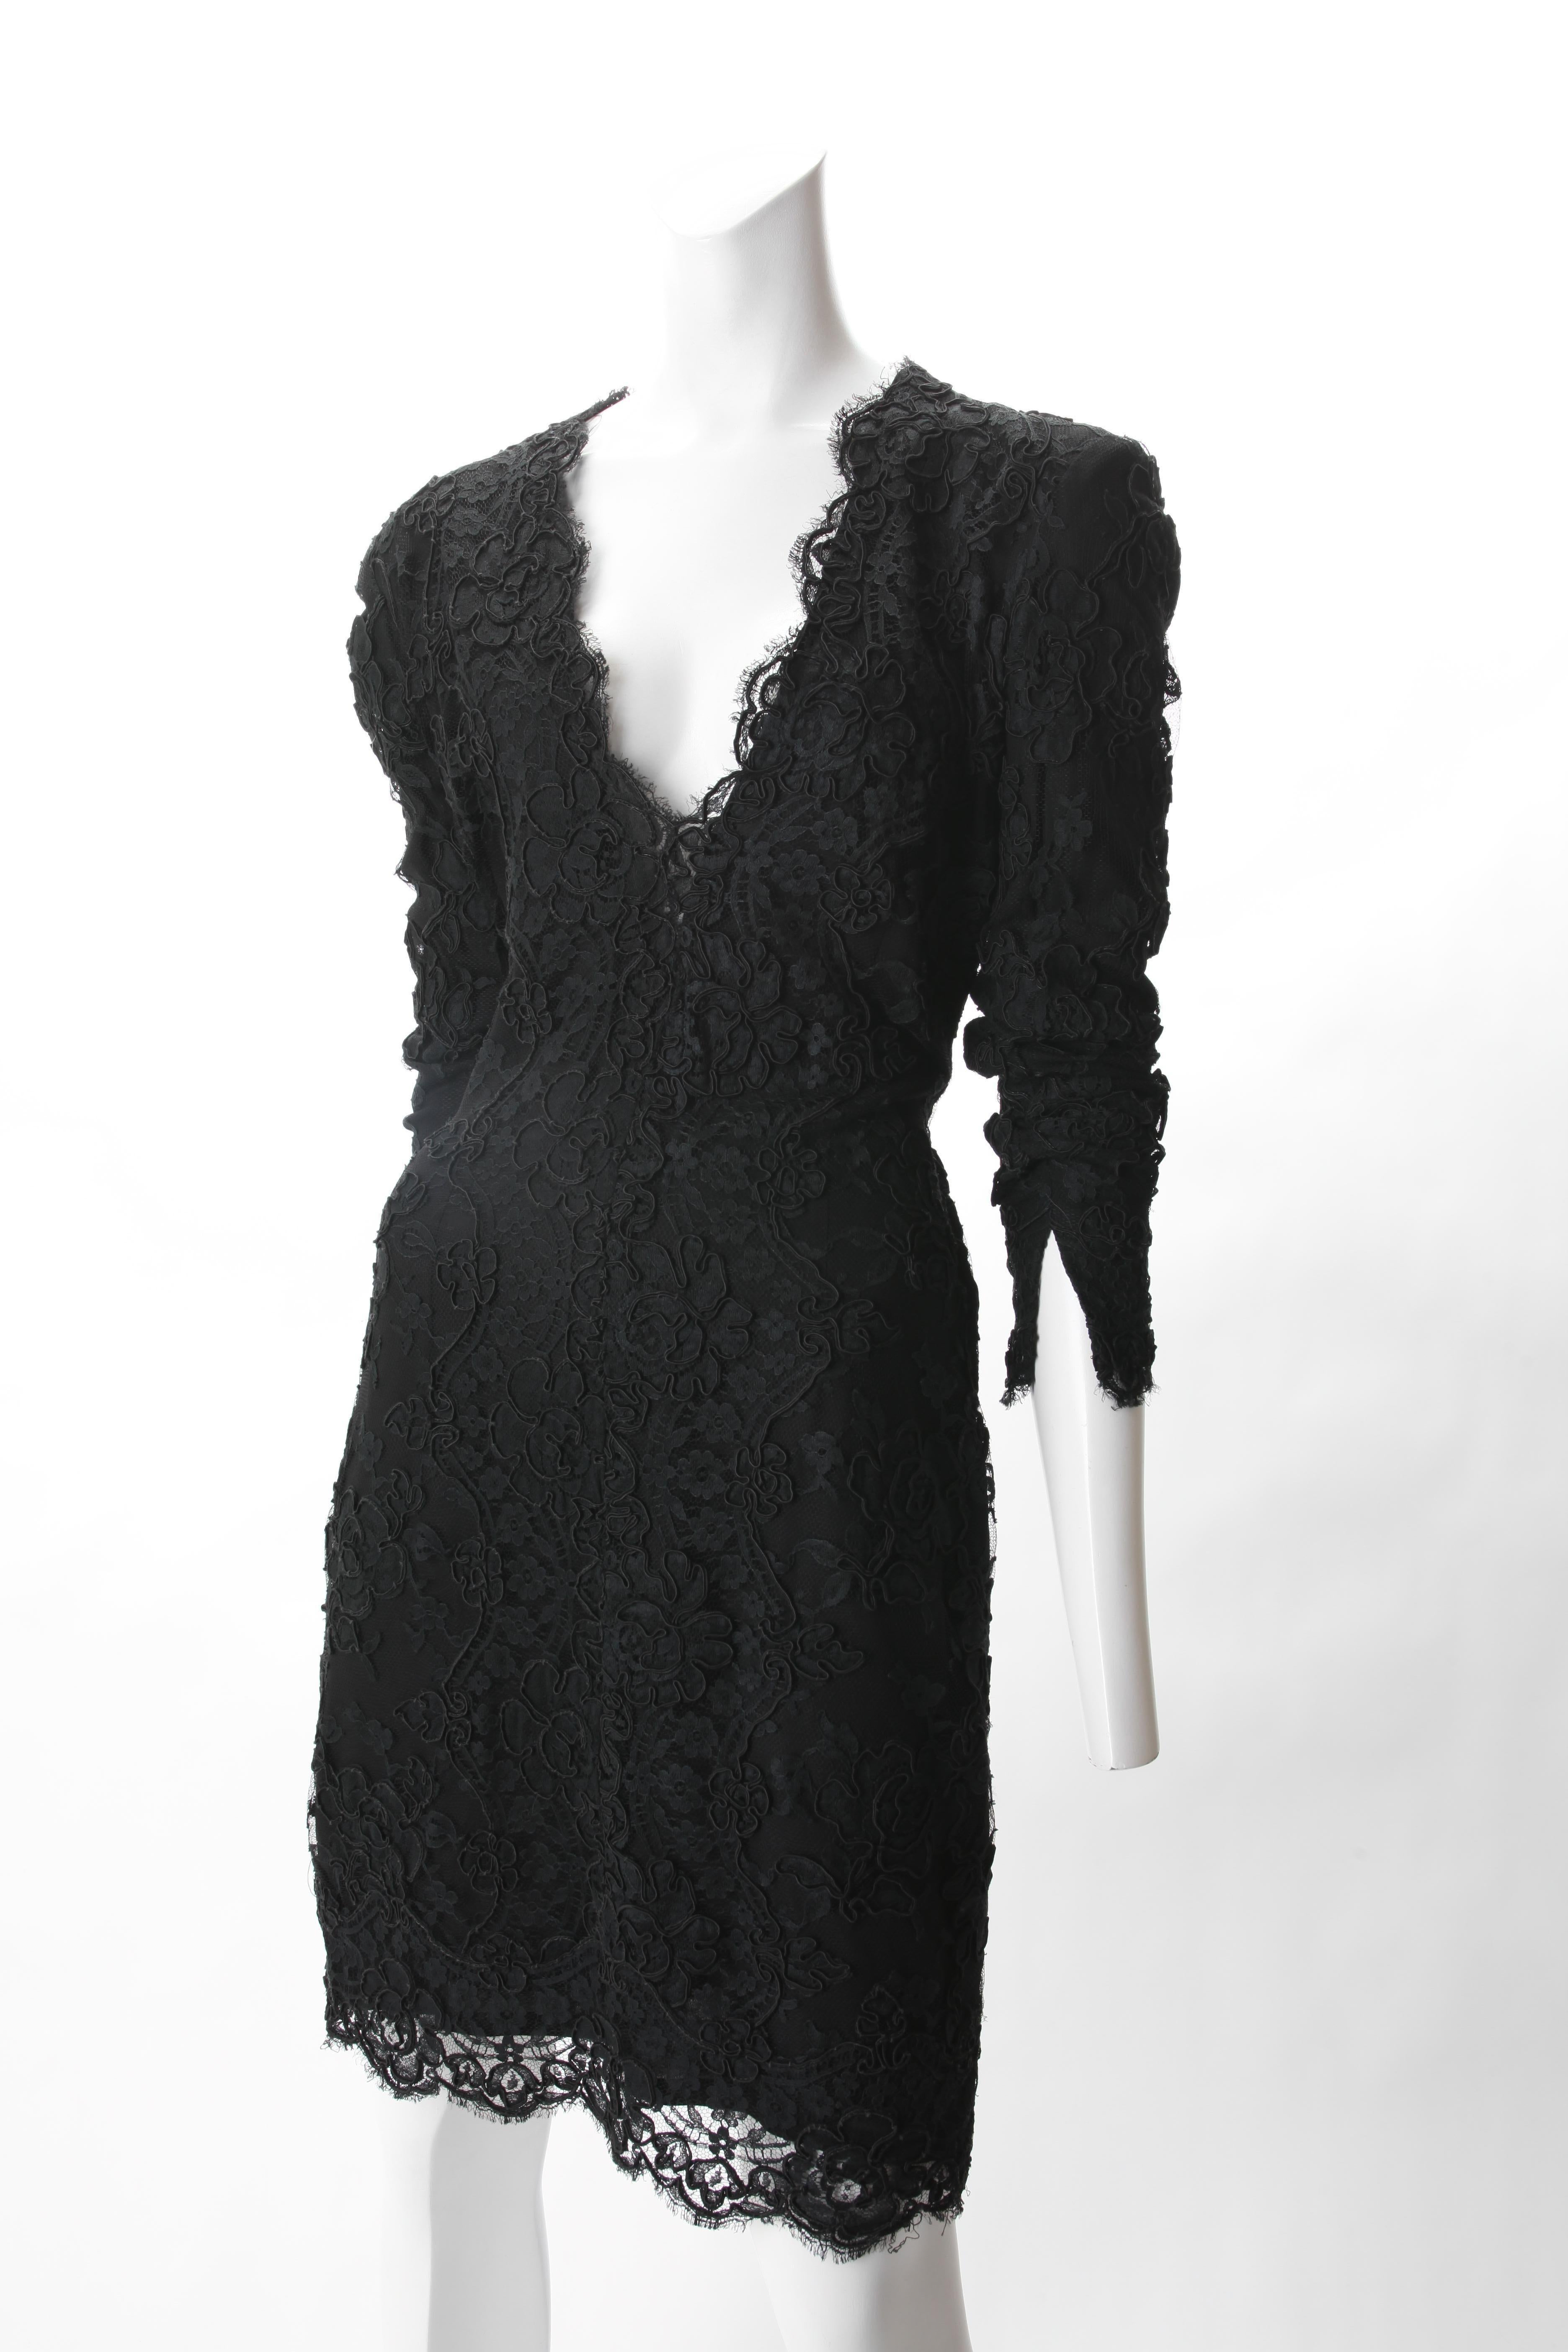 Calvin Klein Black Lace Cocktail Dress, c. 1990s.
Calvin Klein Black Lace Cocktail Dress featuring low cut V-ncekline and shoulder pads. Beautiful Lace hem extends past chiffon lining. Hidden zipper at left side. 

Fits US Size 0 to 2 